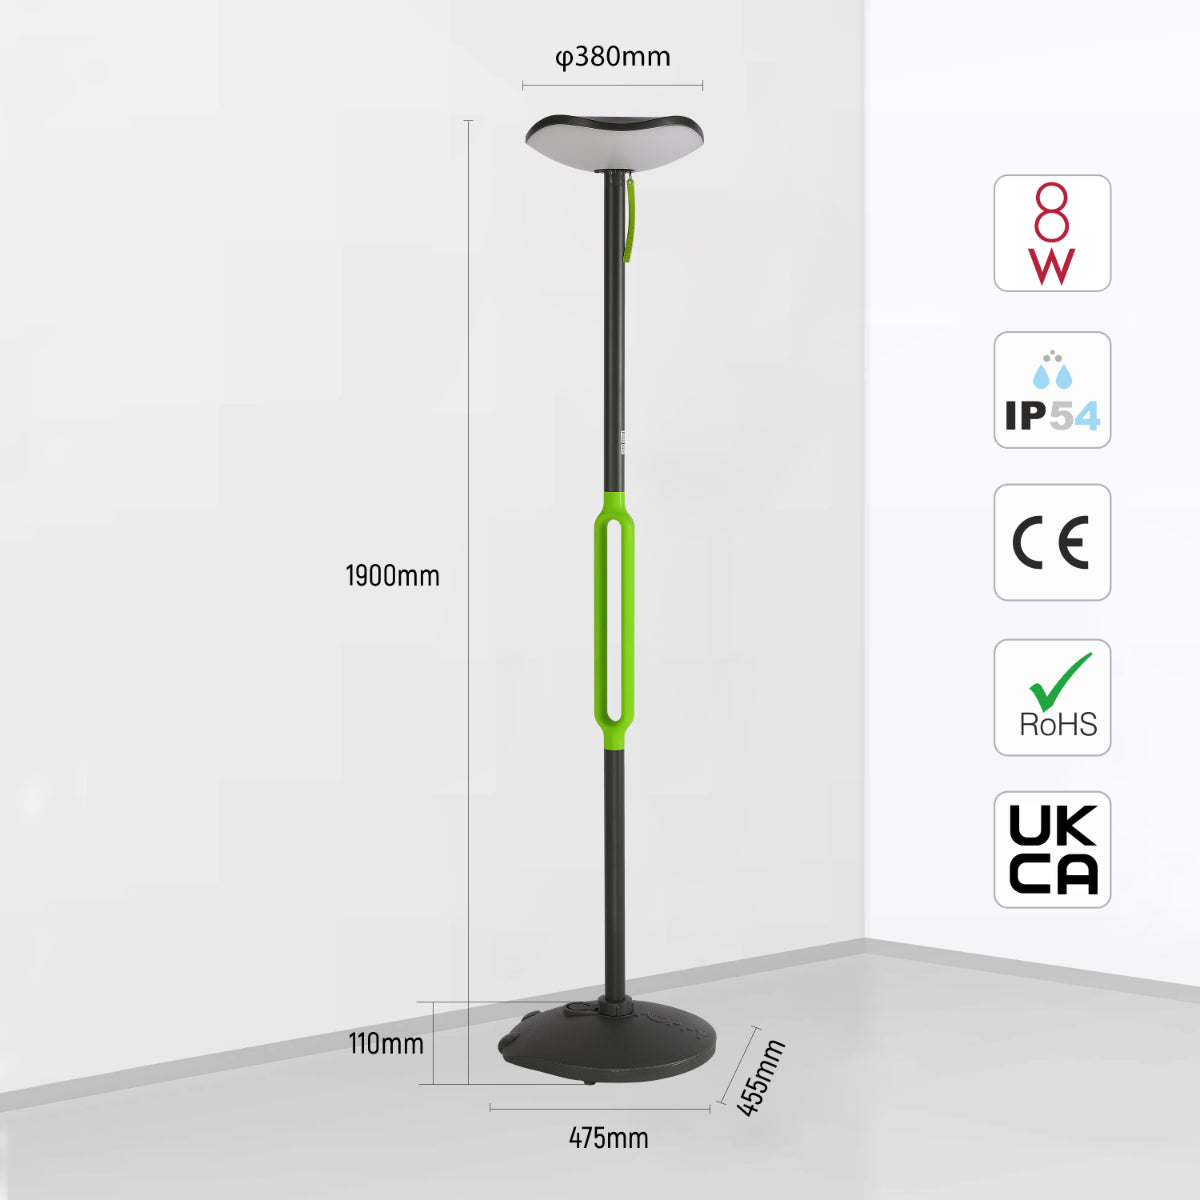 Size and certifications of Poppy LED Solar Garden Post Light with Bluetooth Speaker Dark Grey IP54 240-035021